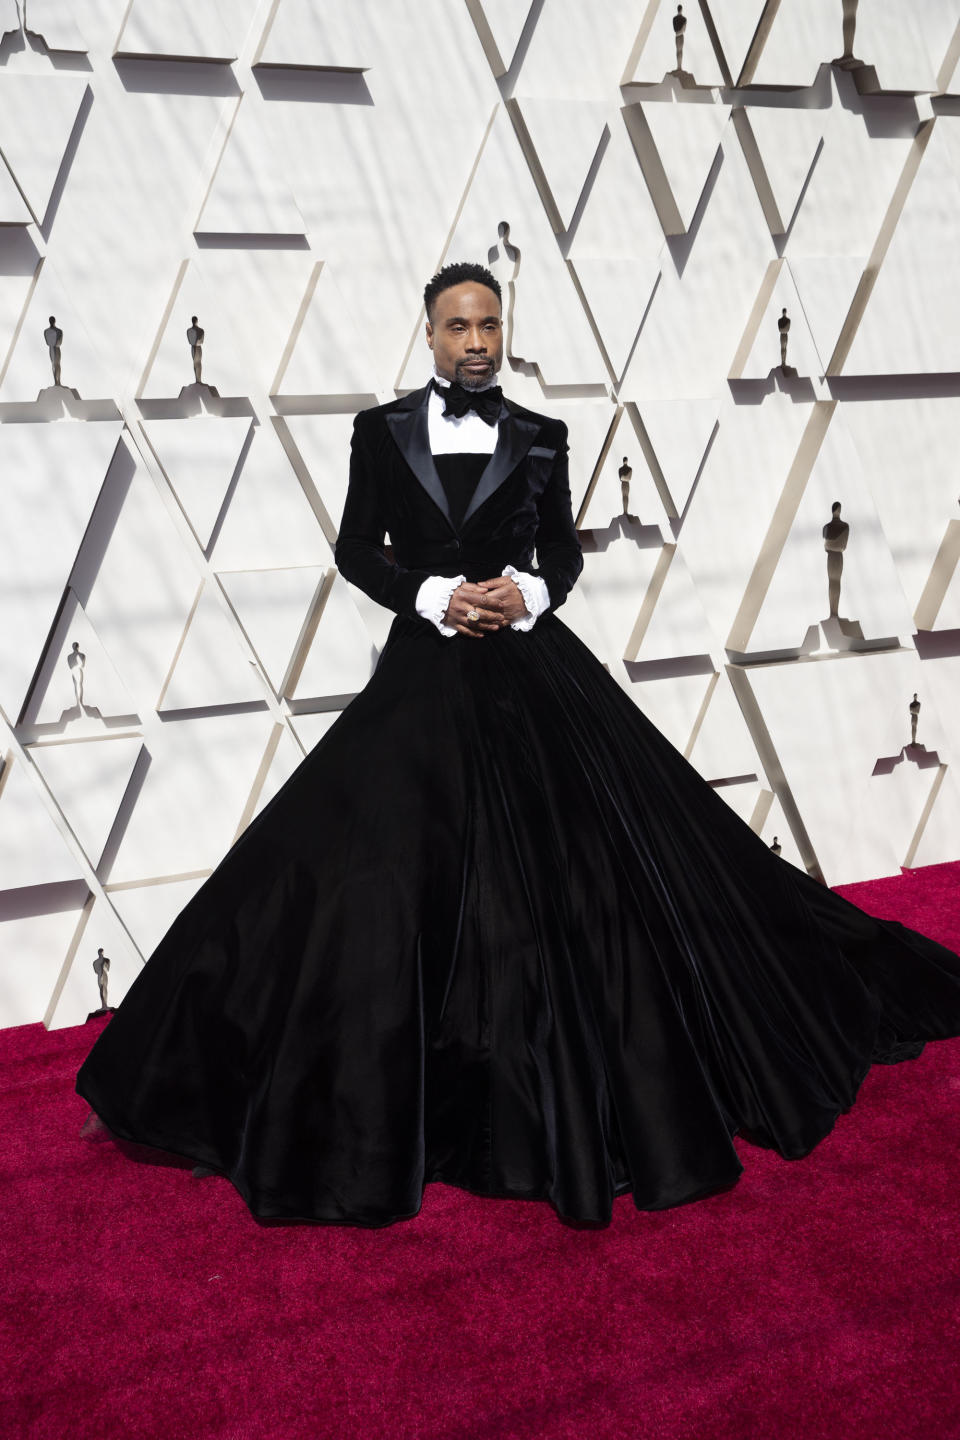 Billy Porter stunned in Christian Siriano.&nbsp; (Photo: Rick Rowell via Getty Images)